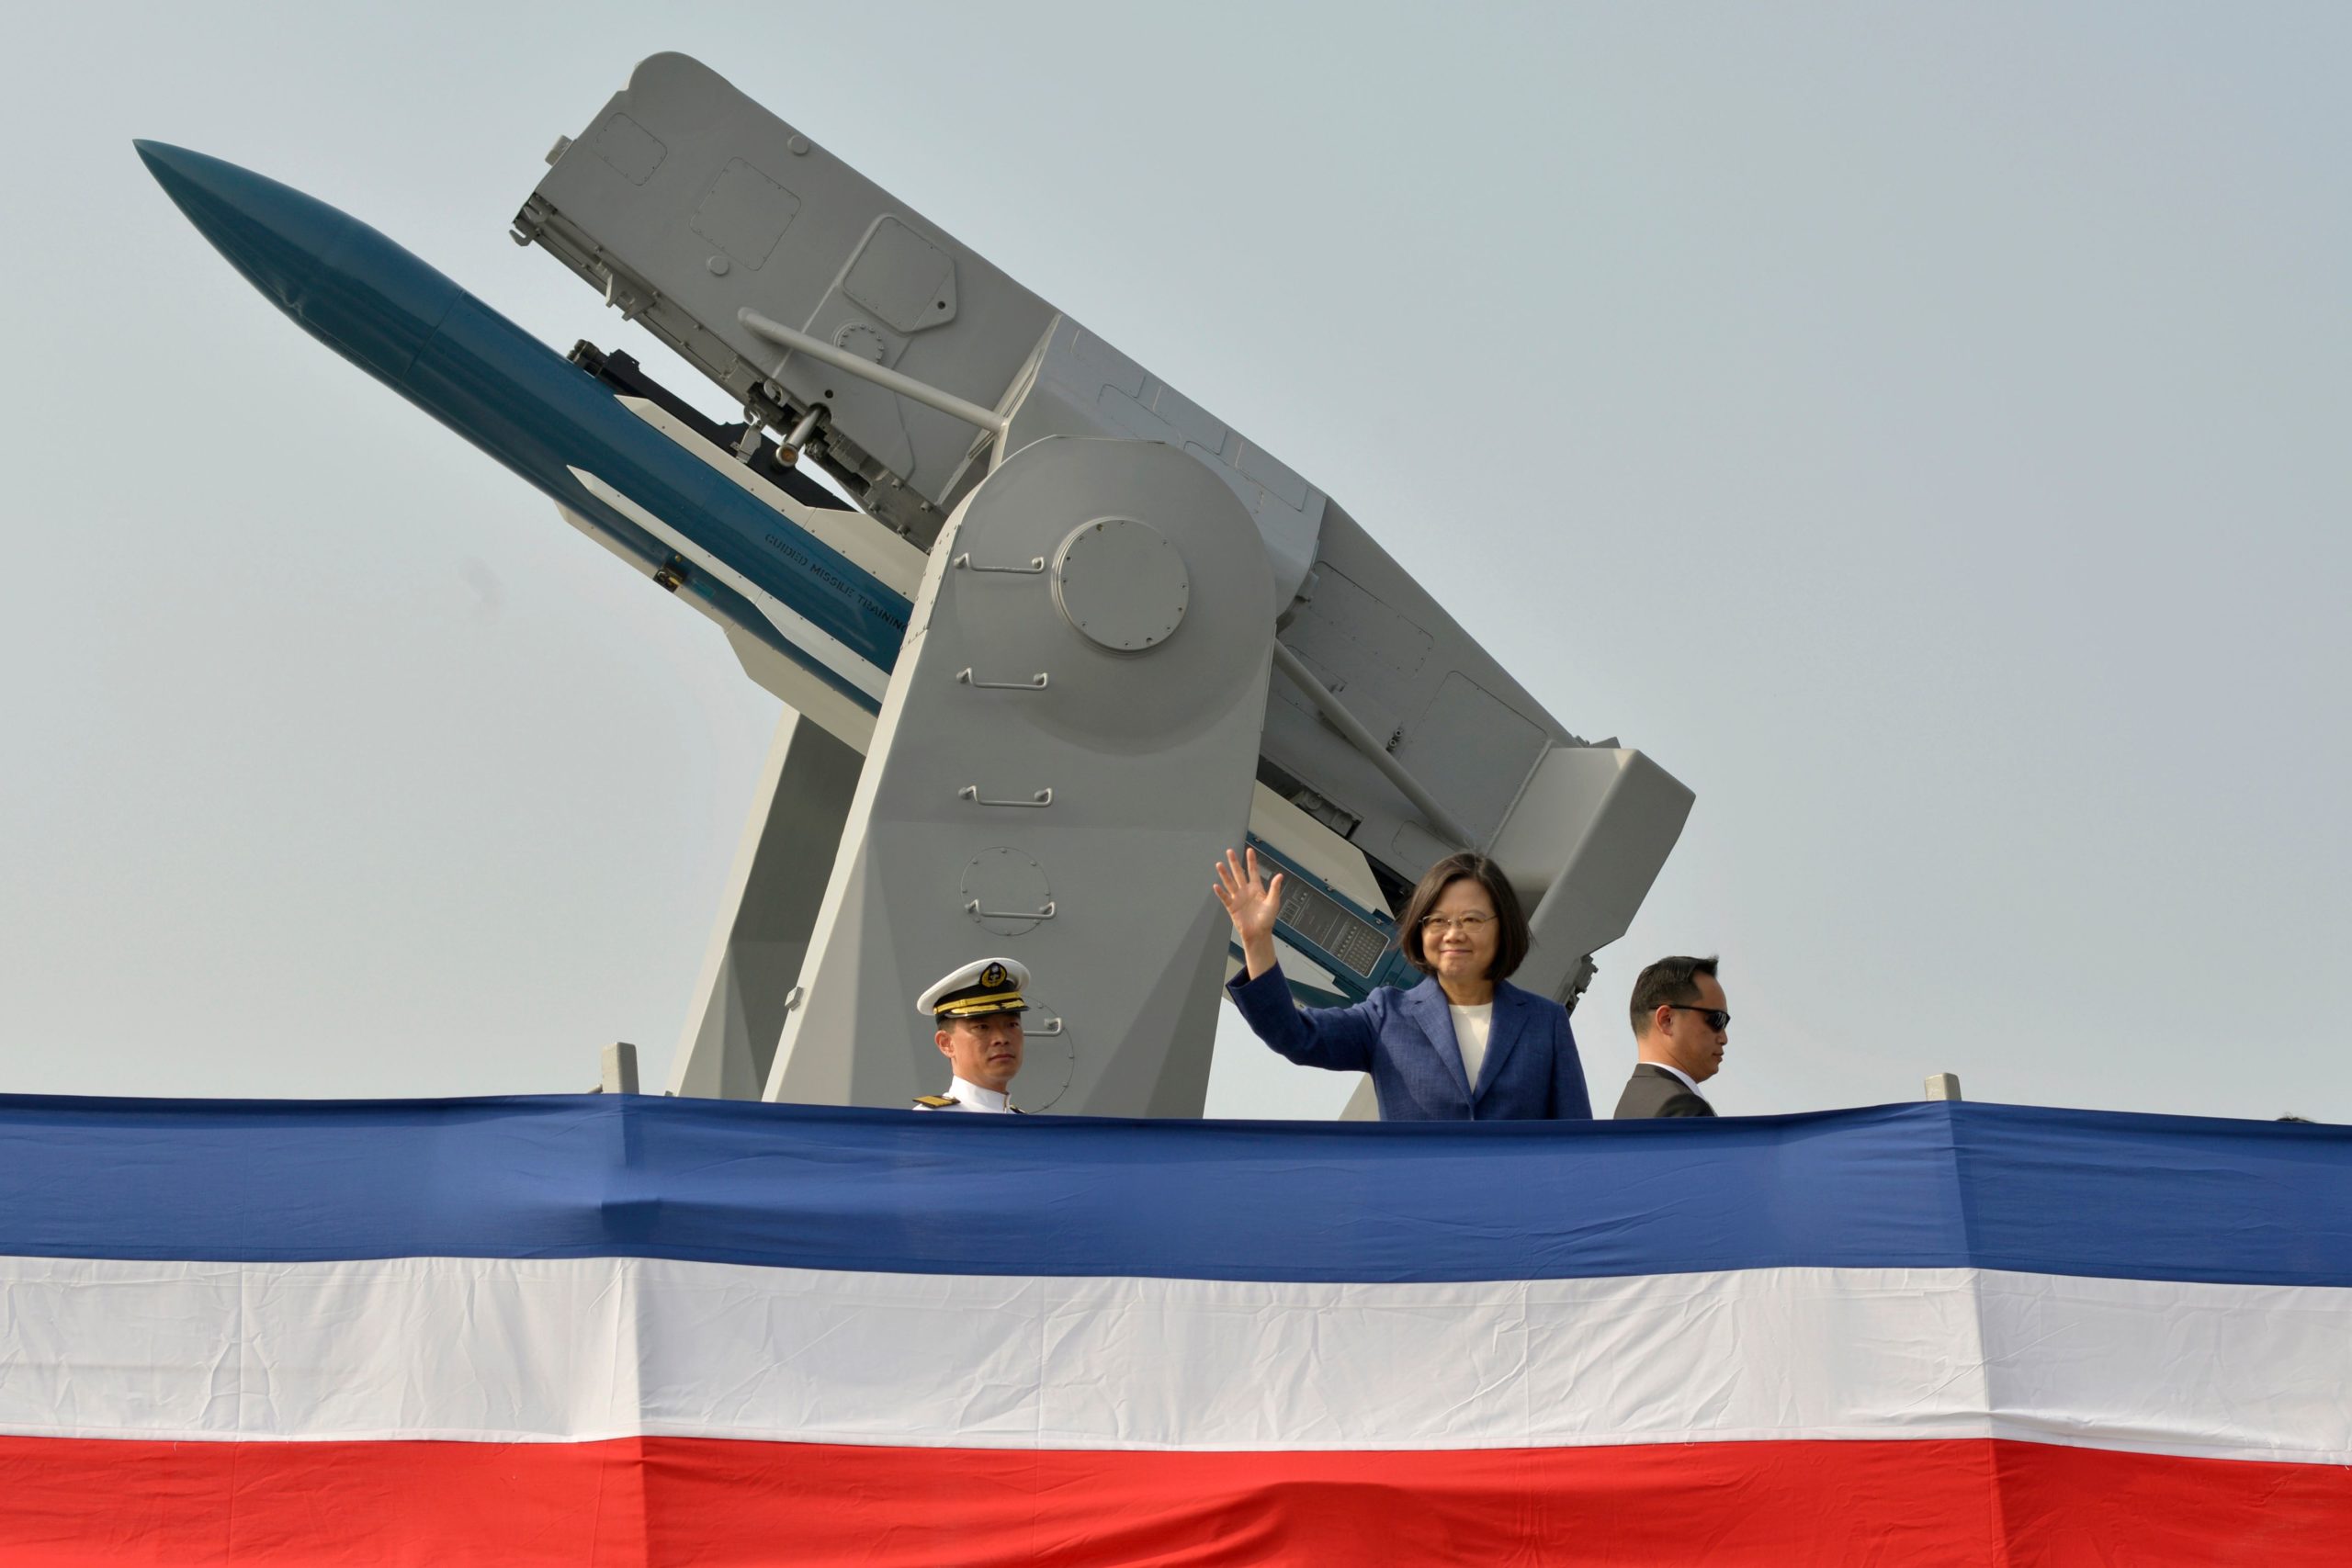 Taiwan's President Tsai Ing-wen (C) waves to assembled guests from the deck of the 'Ming Chuan' frigate during a ceremony to commission two Perry-class guided missile frigates from the US into the Taiwan Navy, in the southern port of Kaohsiung on November 8, 2018. (Photo by CHRIS STOWERS/AFP via Getty Images)